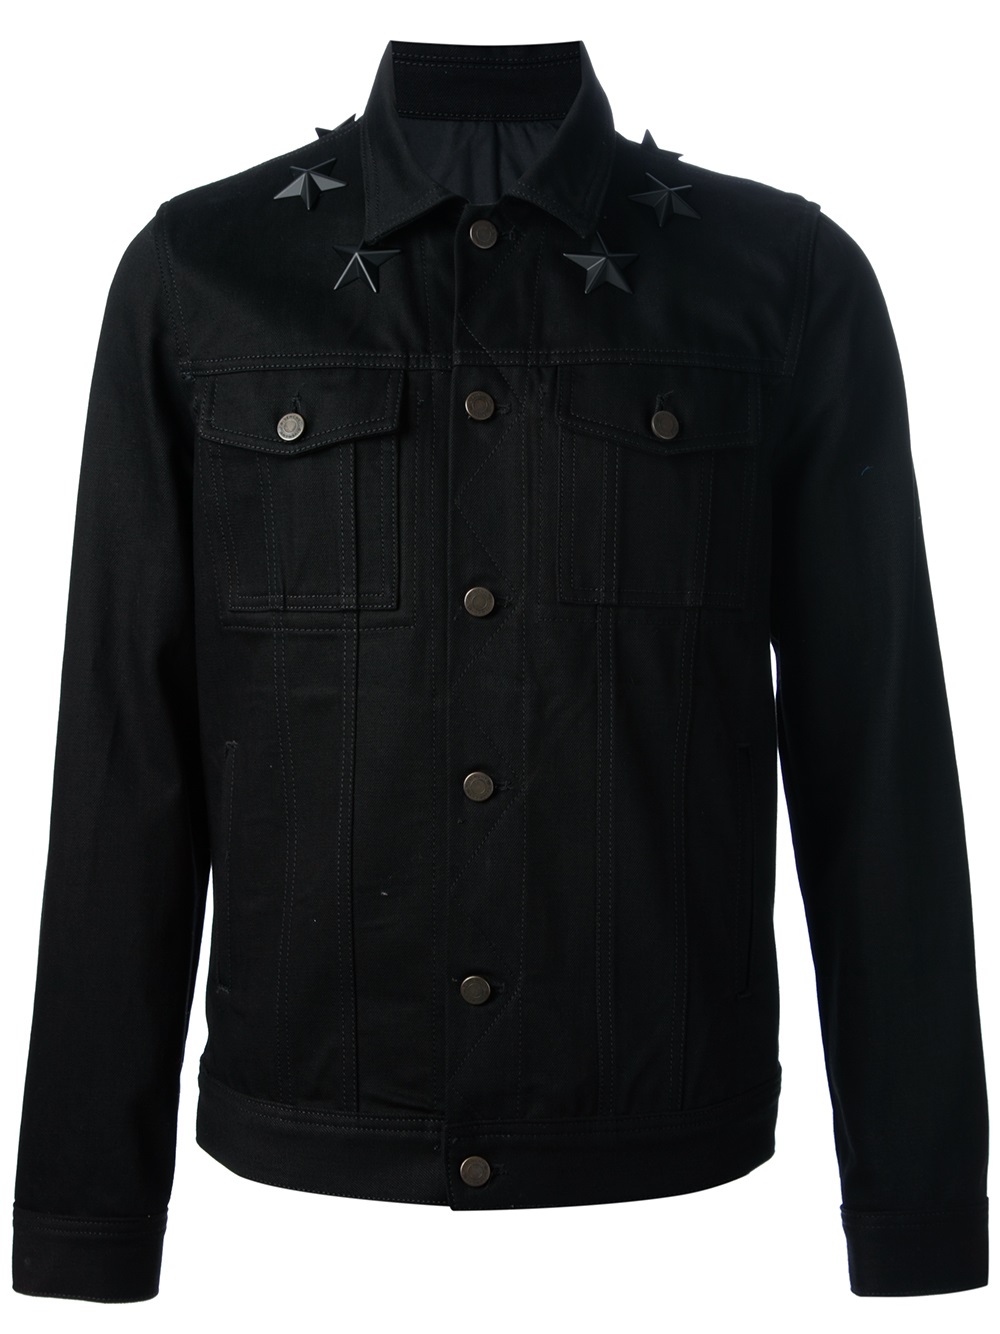 Lyst - Givenchy Studded Button Down Jacket in Black for Men